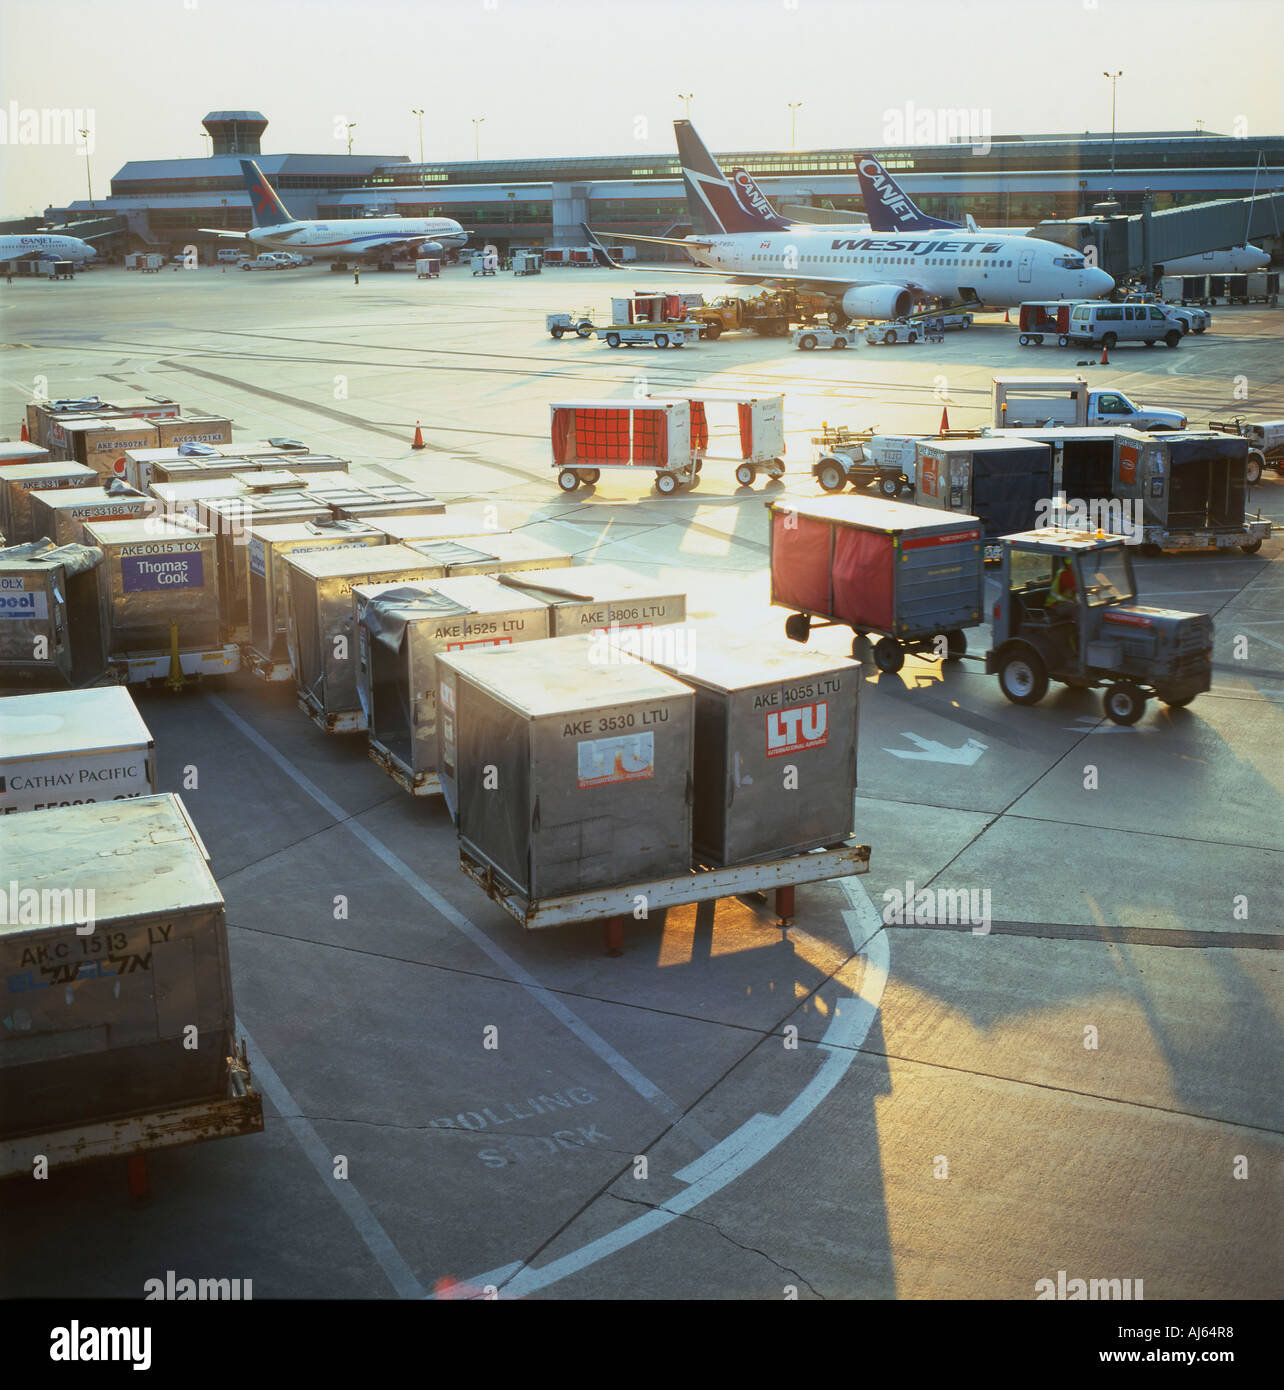 Air cargo and planes loading and unloading outside on the tarmac at Lester Pearson Airport in Toronto Ontario Canada   KATHY DEWITT Stock Photo